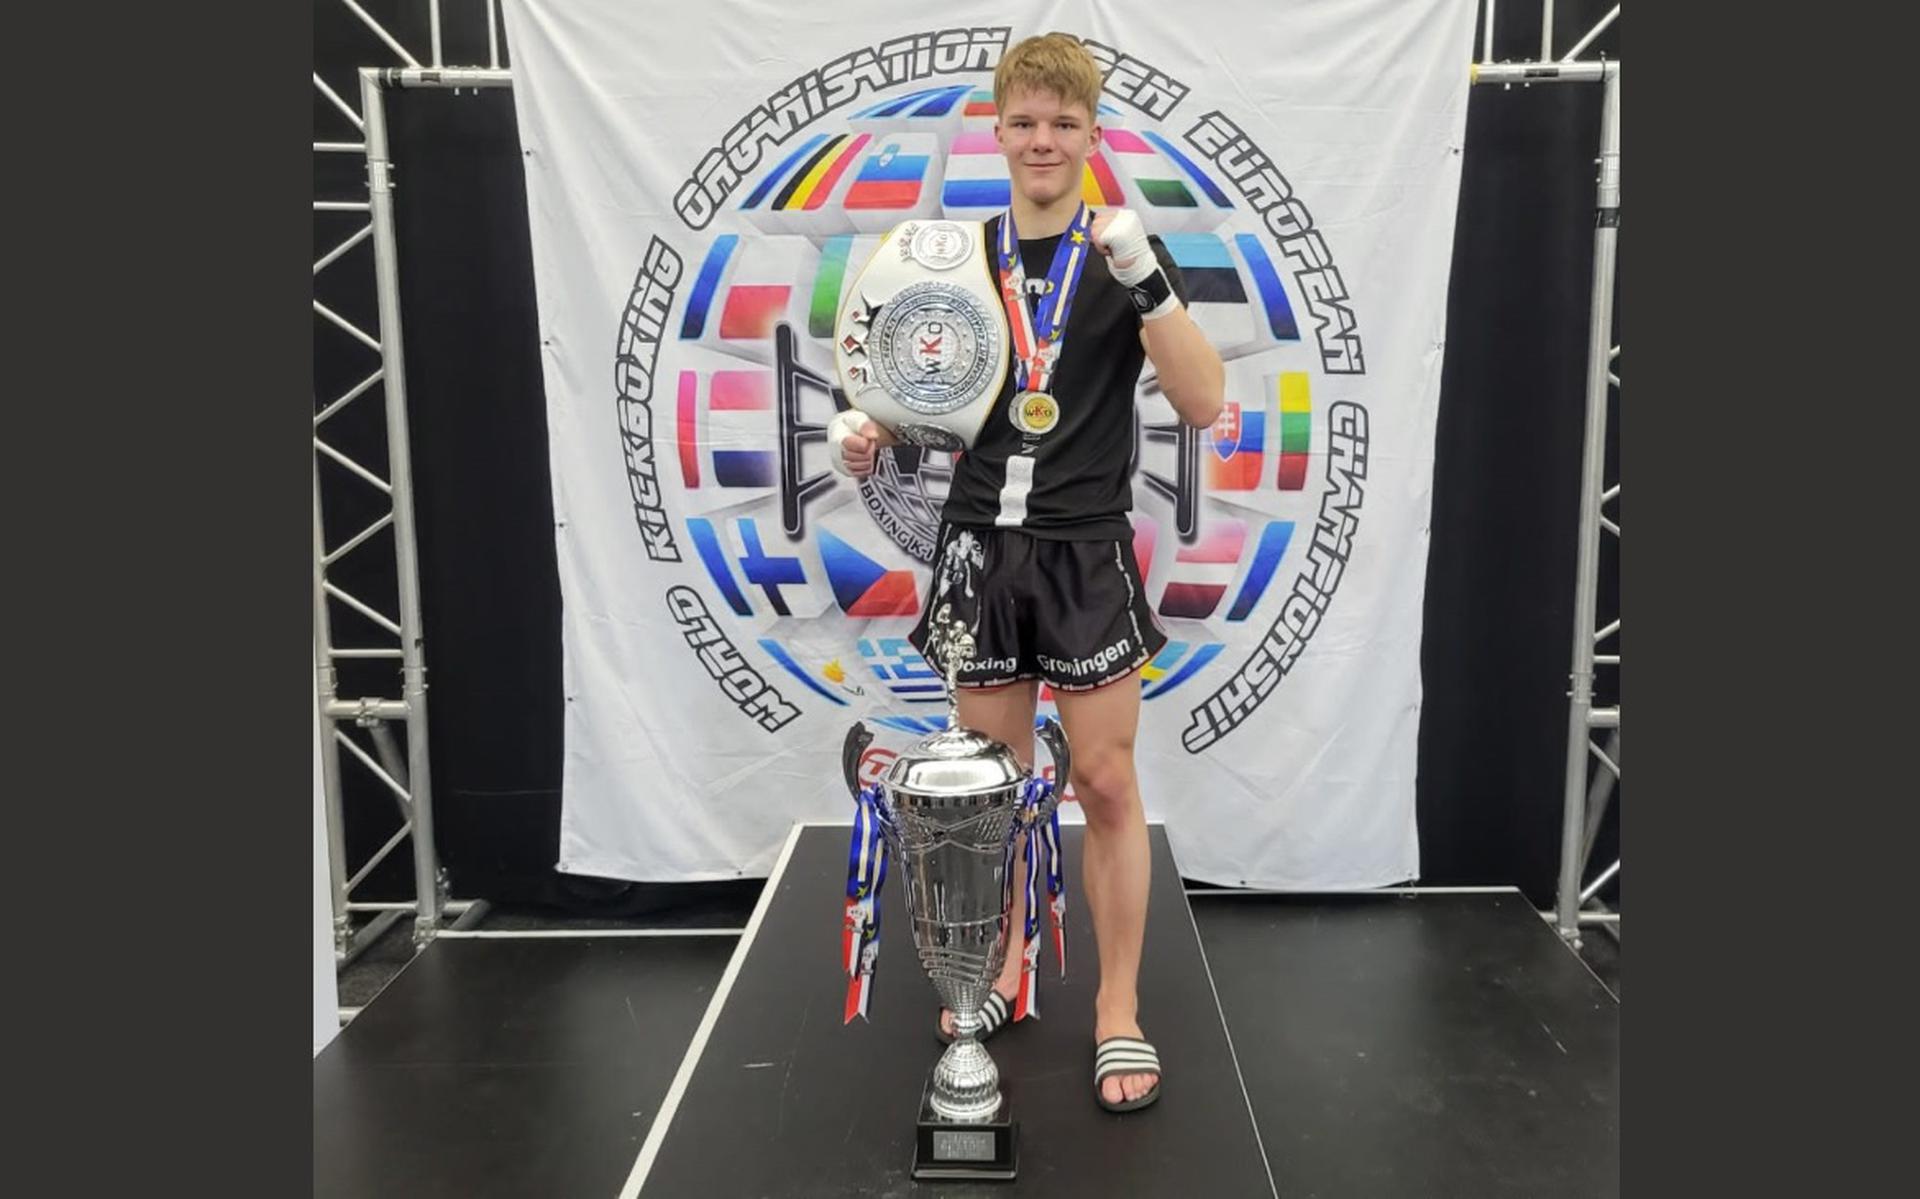 K1 European title for Sven Bertema (15) from Oude Pekela A stepping stone to a glorious career?